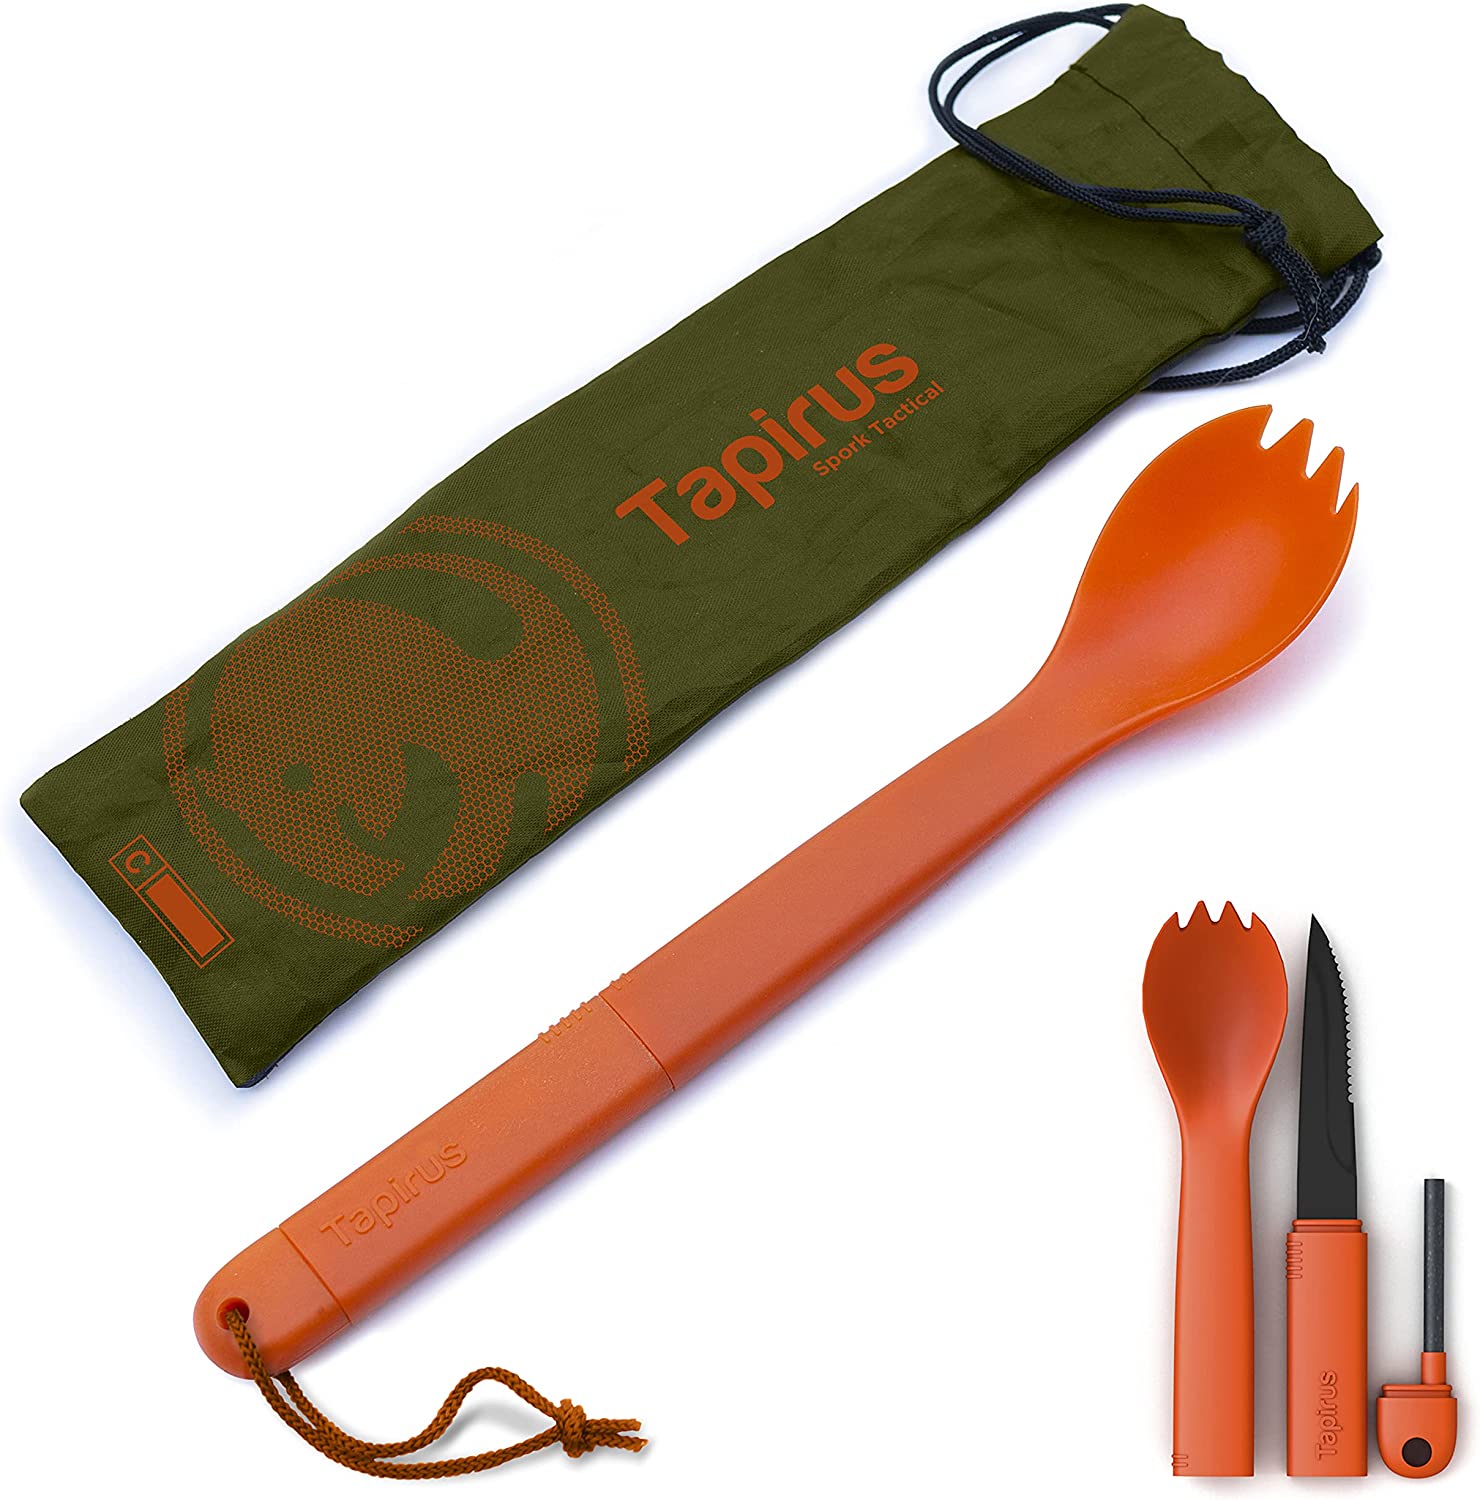 Tapirus Spork Tactical Orange | BPA Free Spoon Fork, Stainless Steel Knife and Fire Starter | 3 in 1 multipurpose utensil | Outdoor hiking, camping & backpacking gear | Fit for MRE